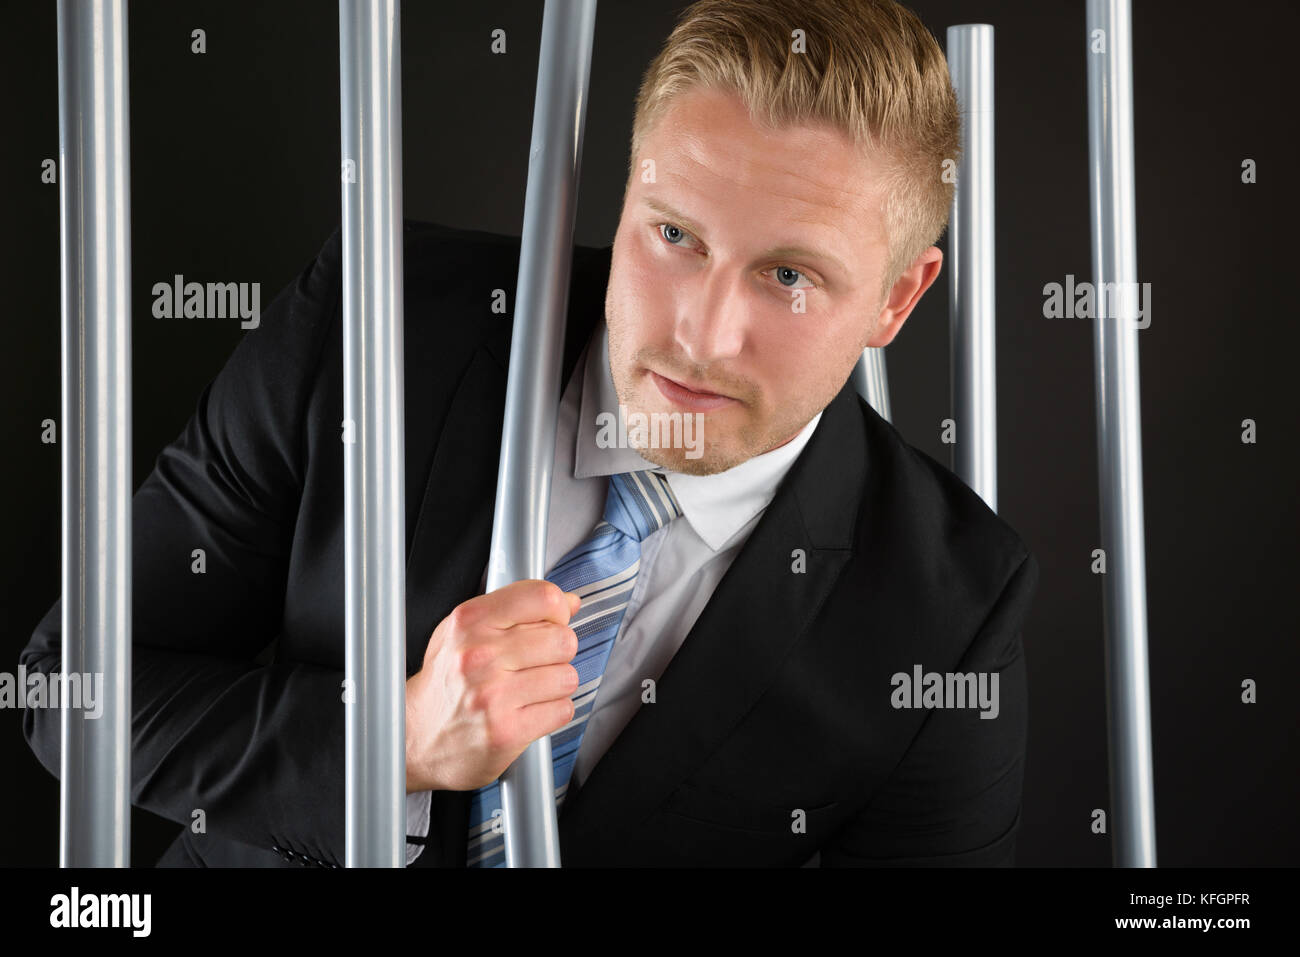 Portrait Of Young Adult Businessman Escaping From Prison Stock Photo